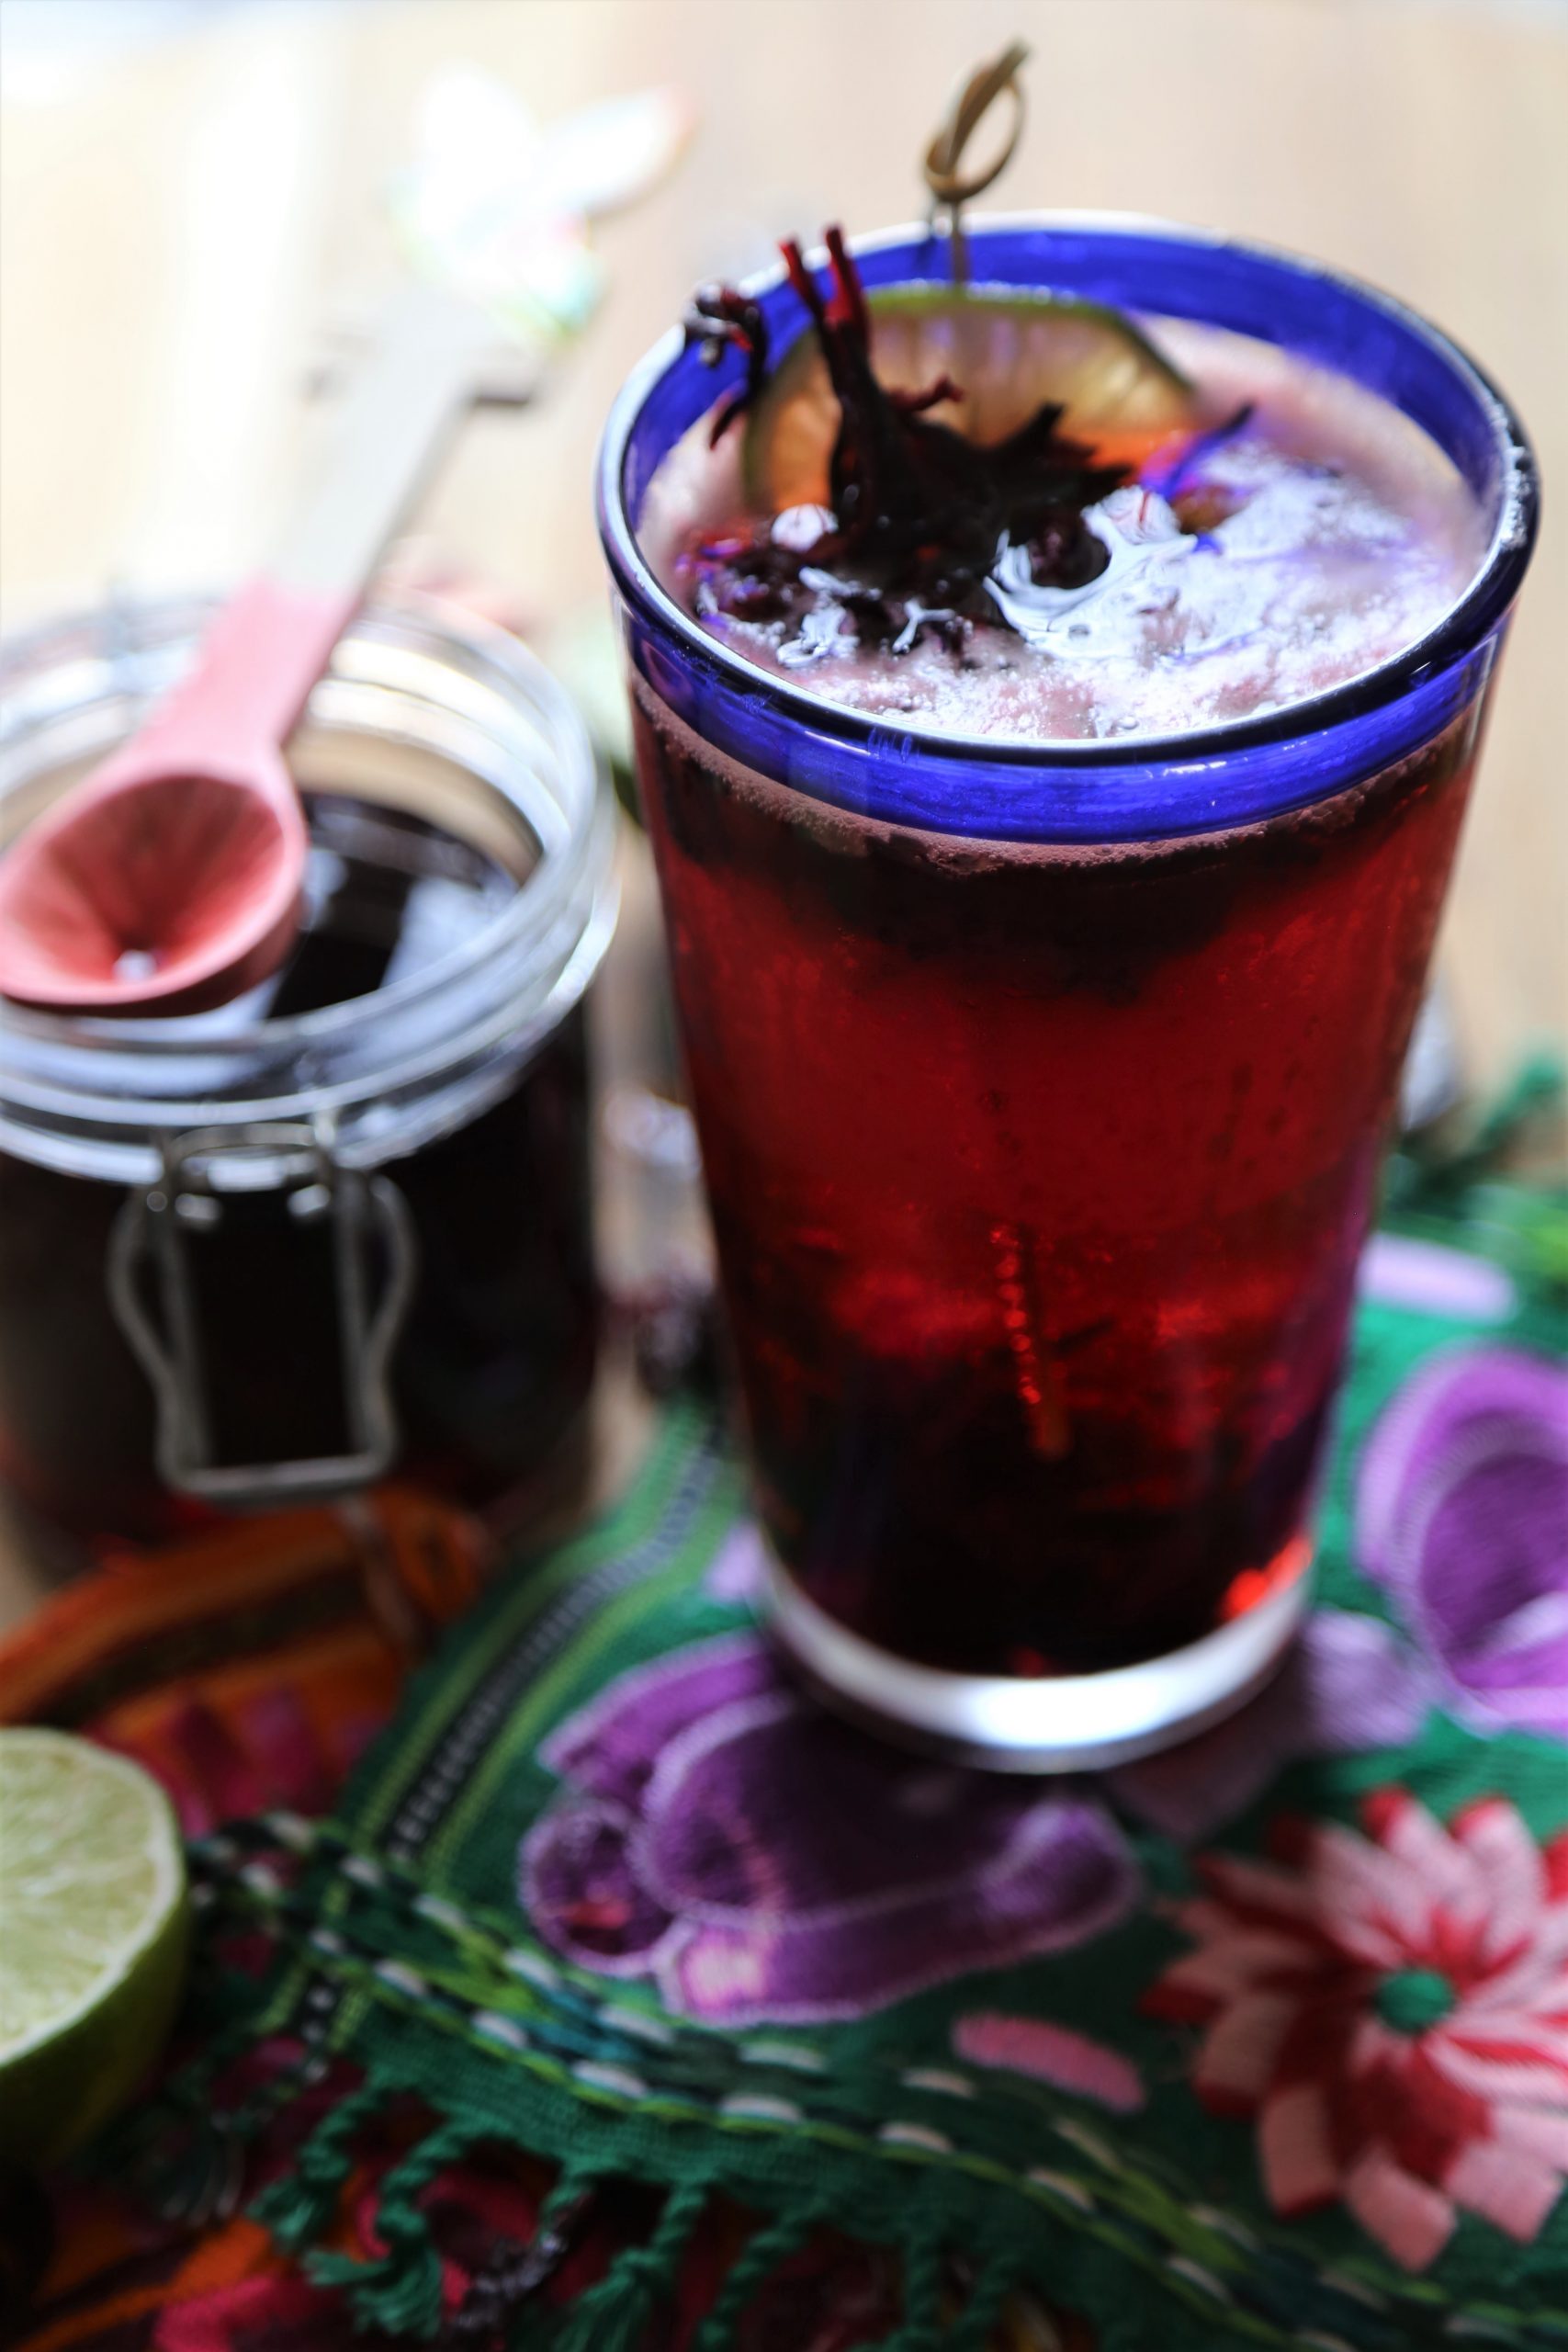 HOW TO MAKE HIBISCUS BEER